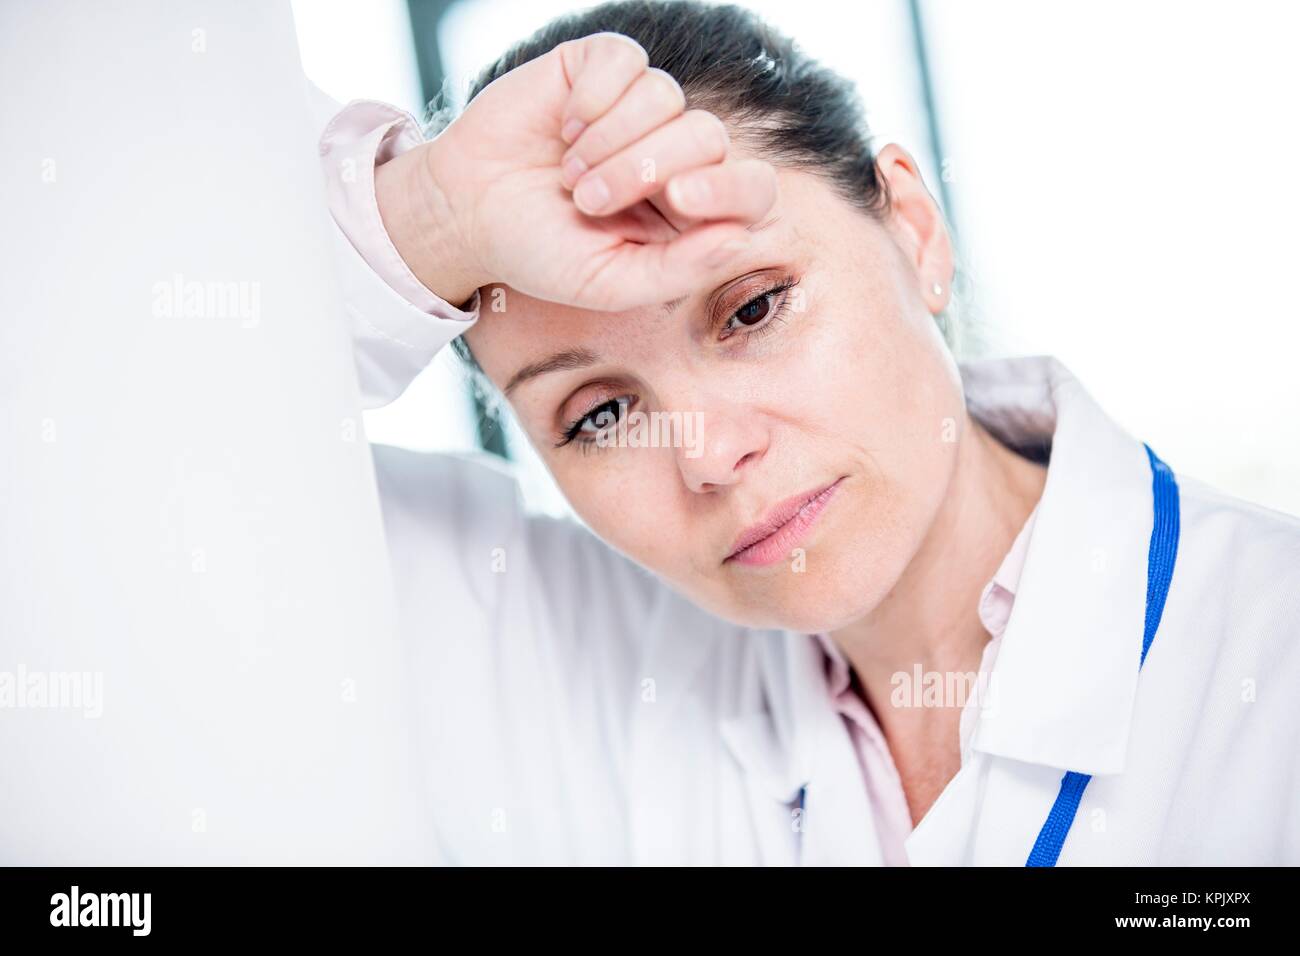 Young female medical student with head in hands. Stock Photo